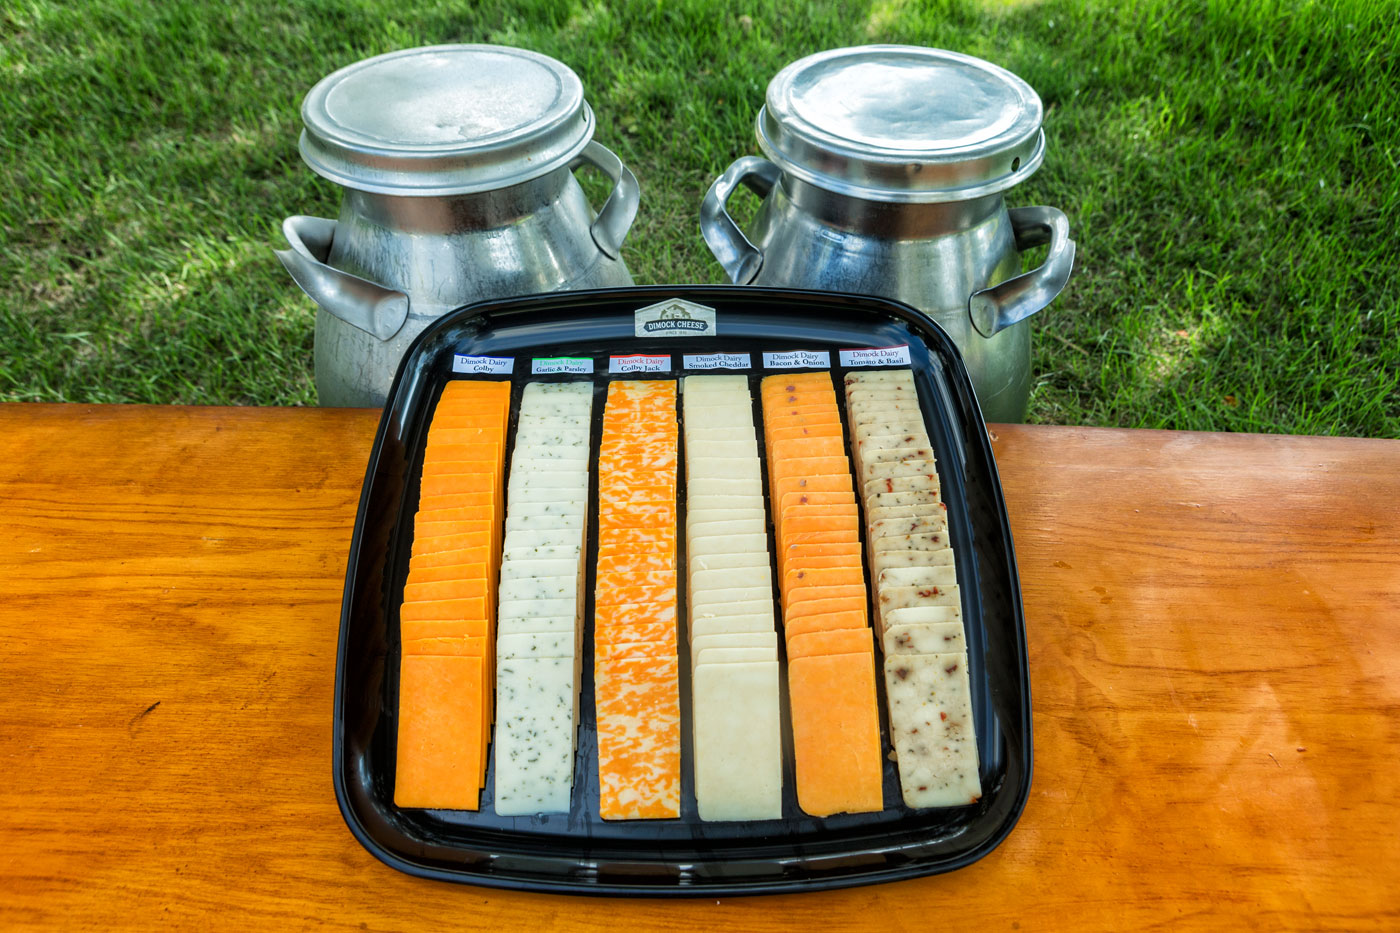 Our Cheese tray comes in a variety of 6 chesses sliced or cubed,